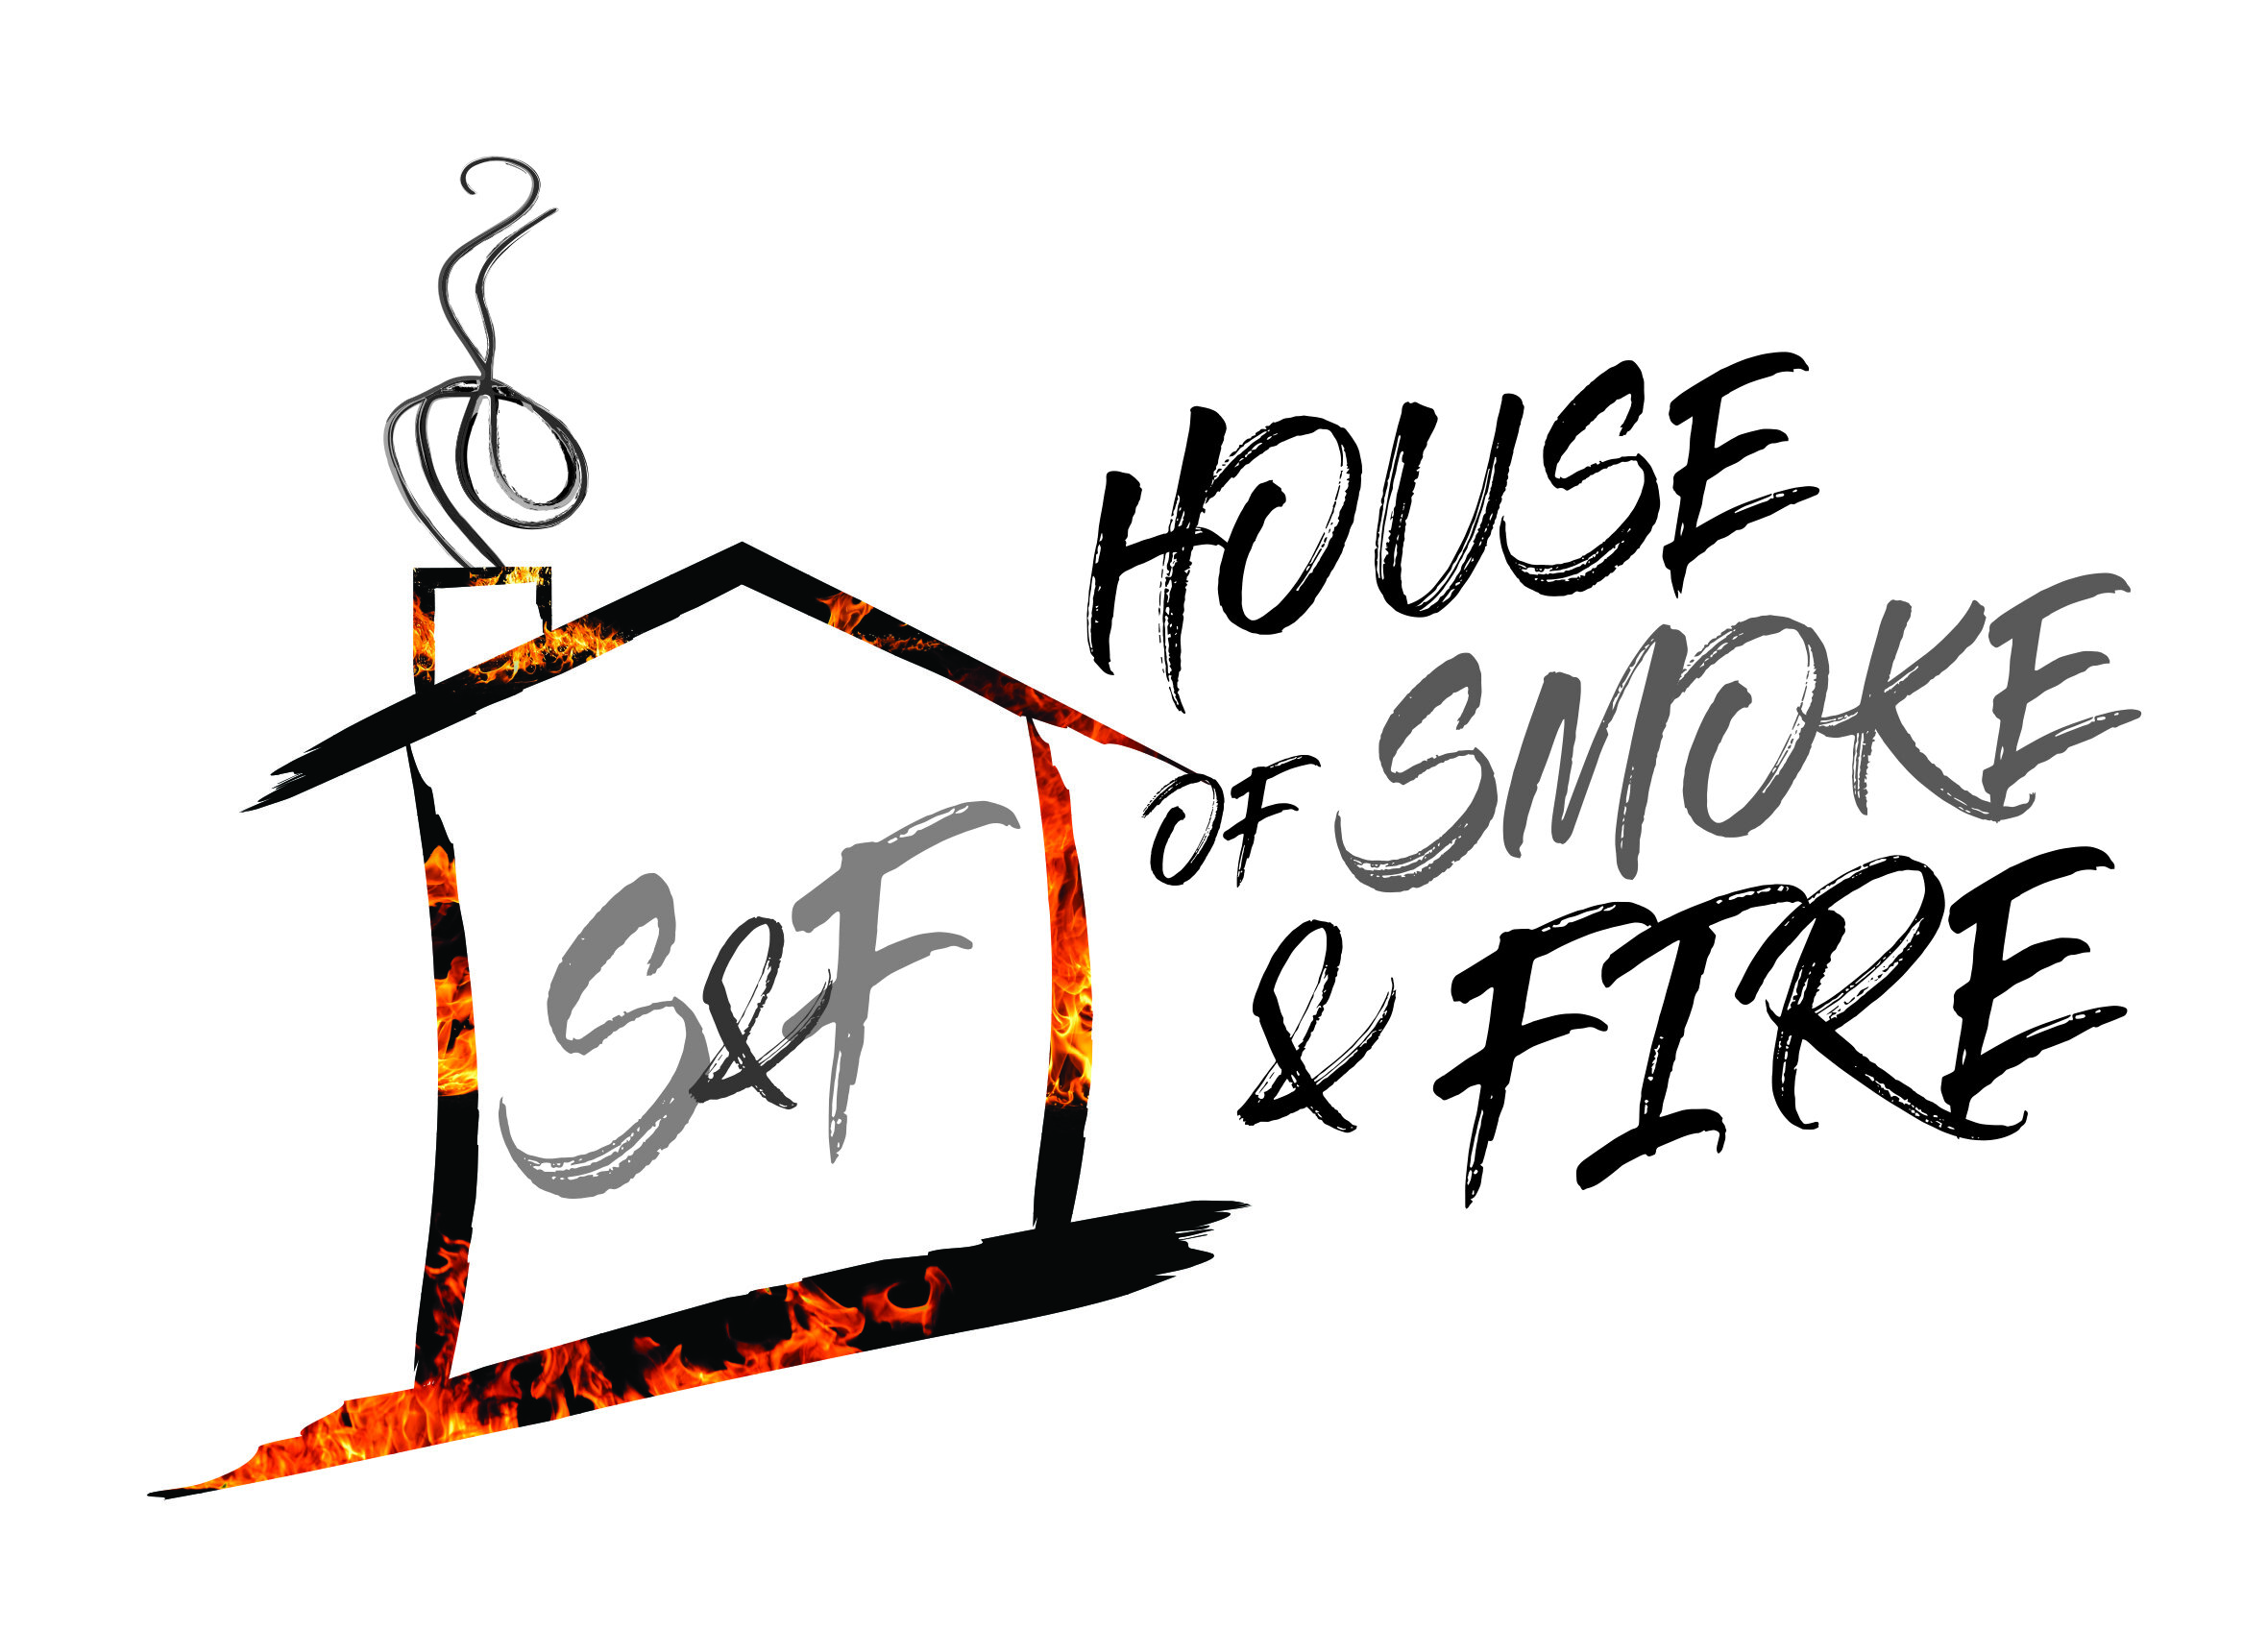 House of smoke and fire